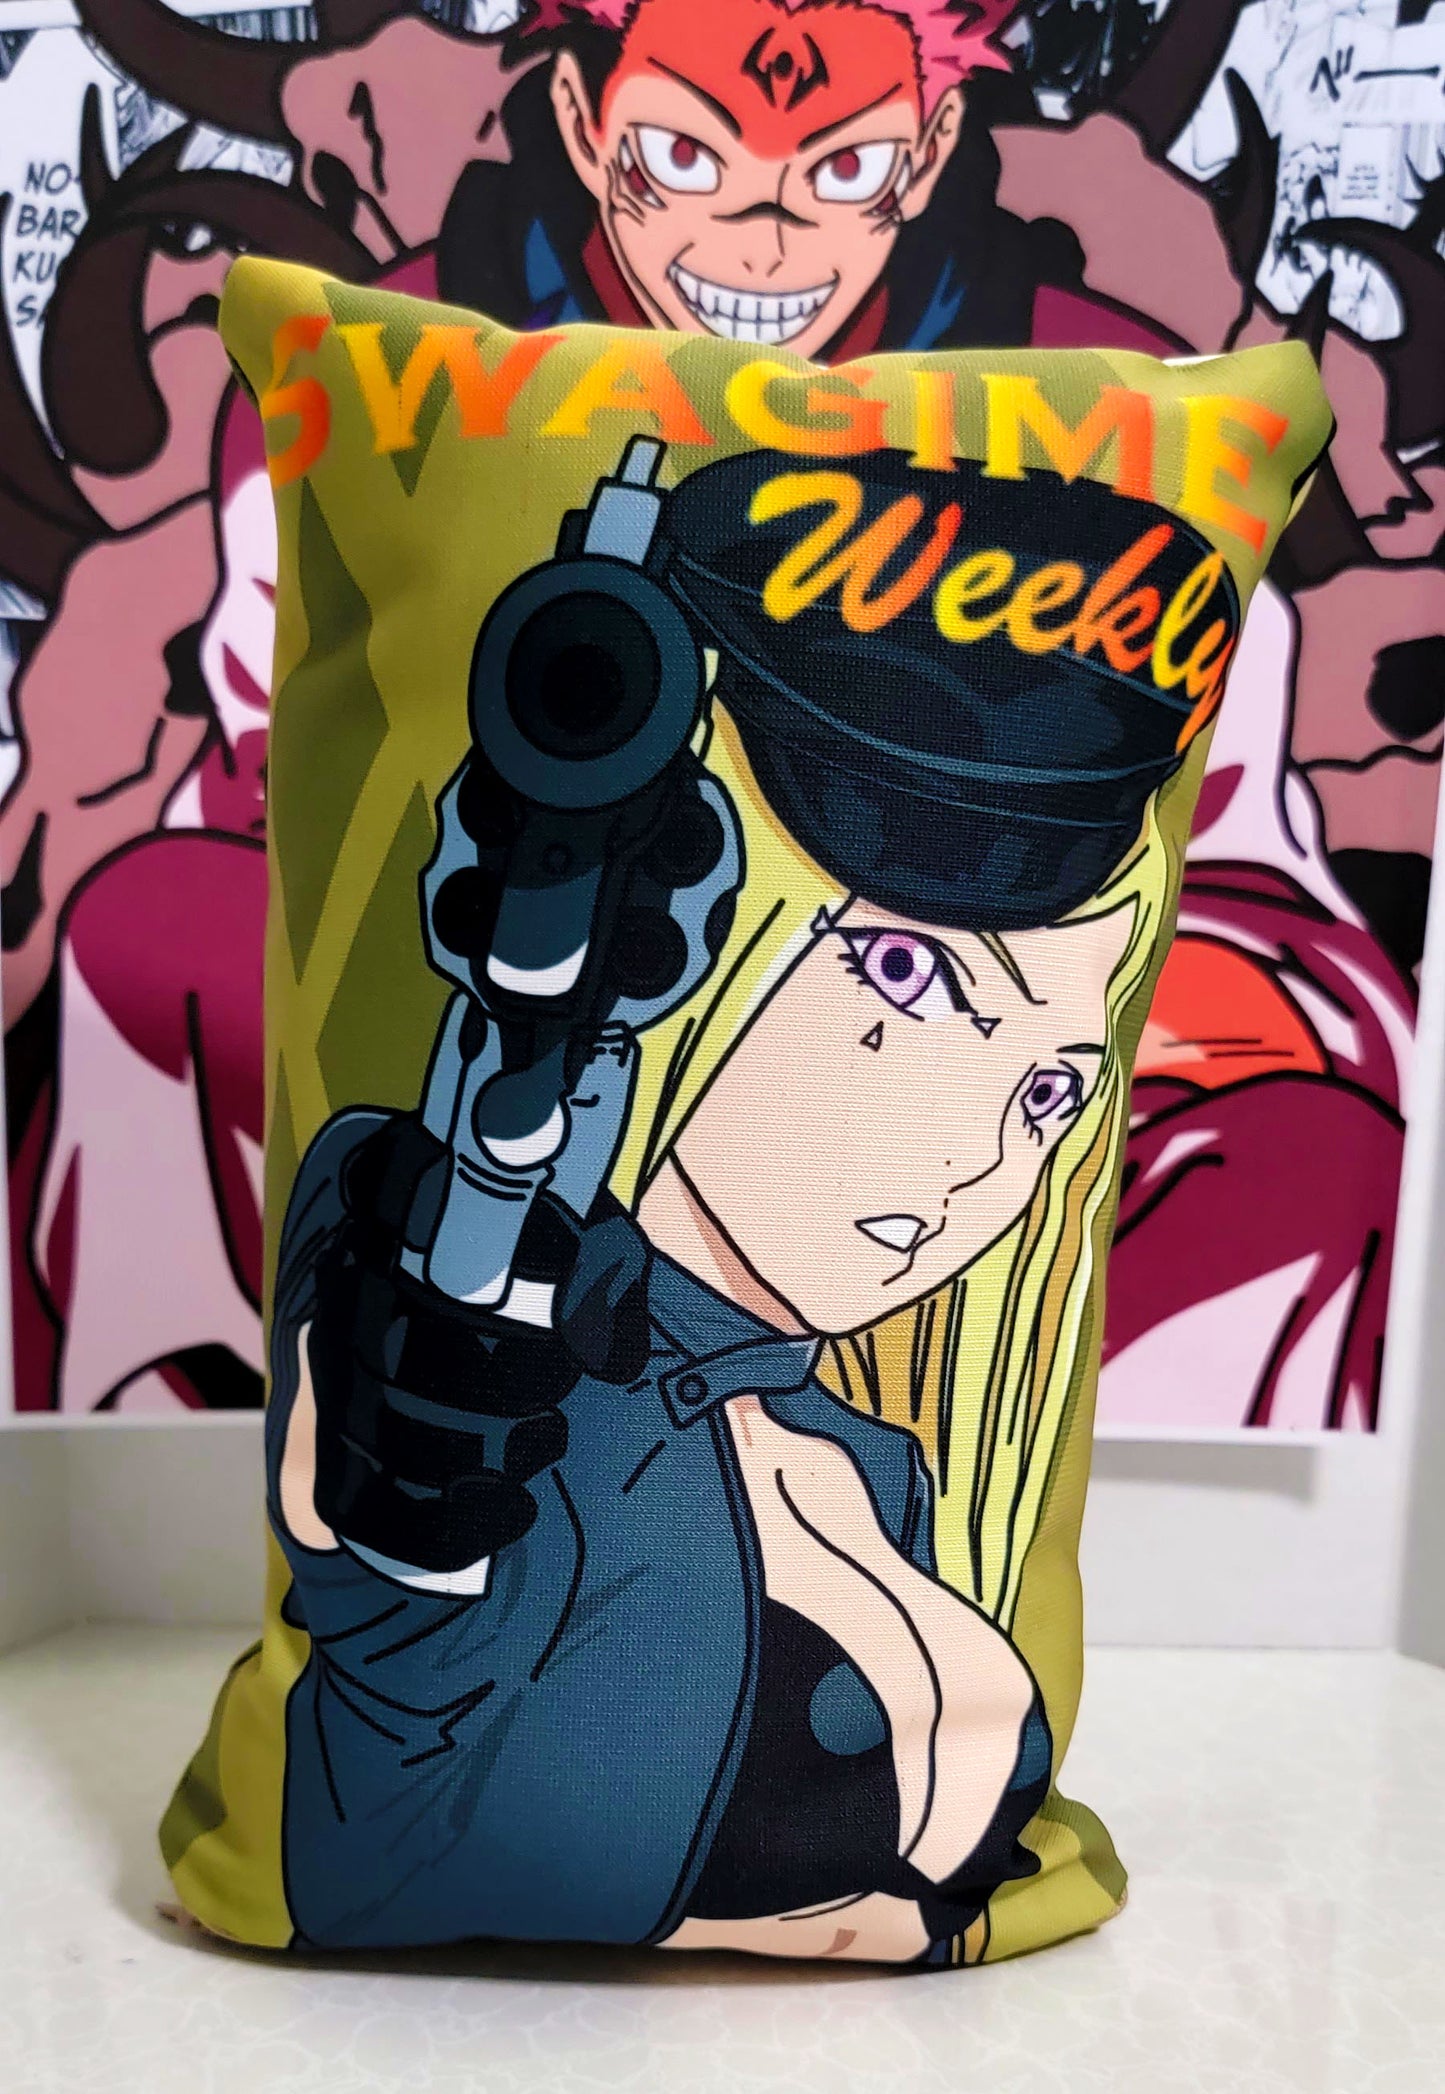 Noragami SWAGIME WEEKLY PILLOW (Standard Size)